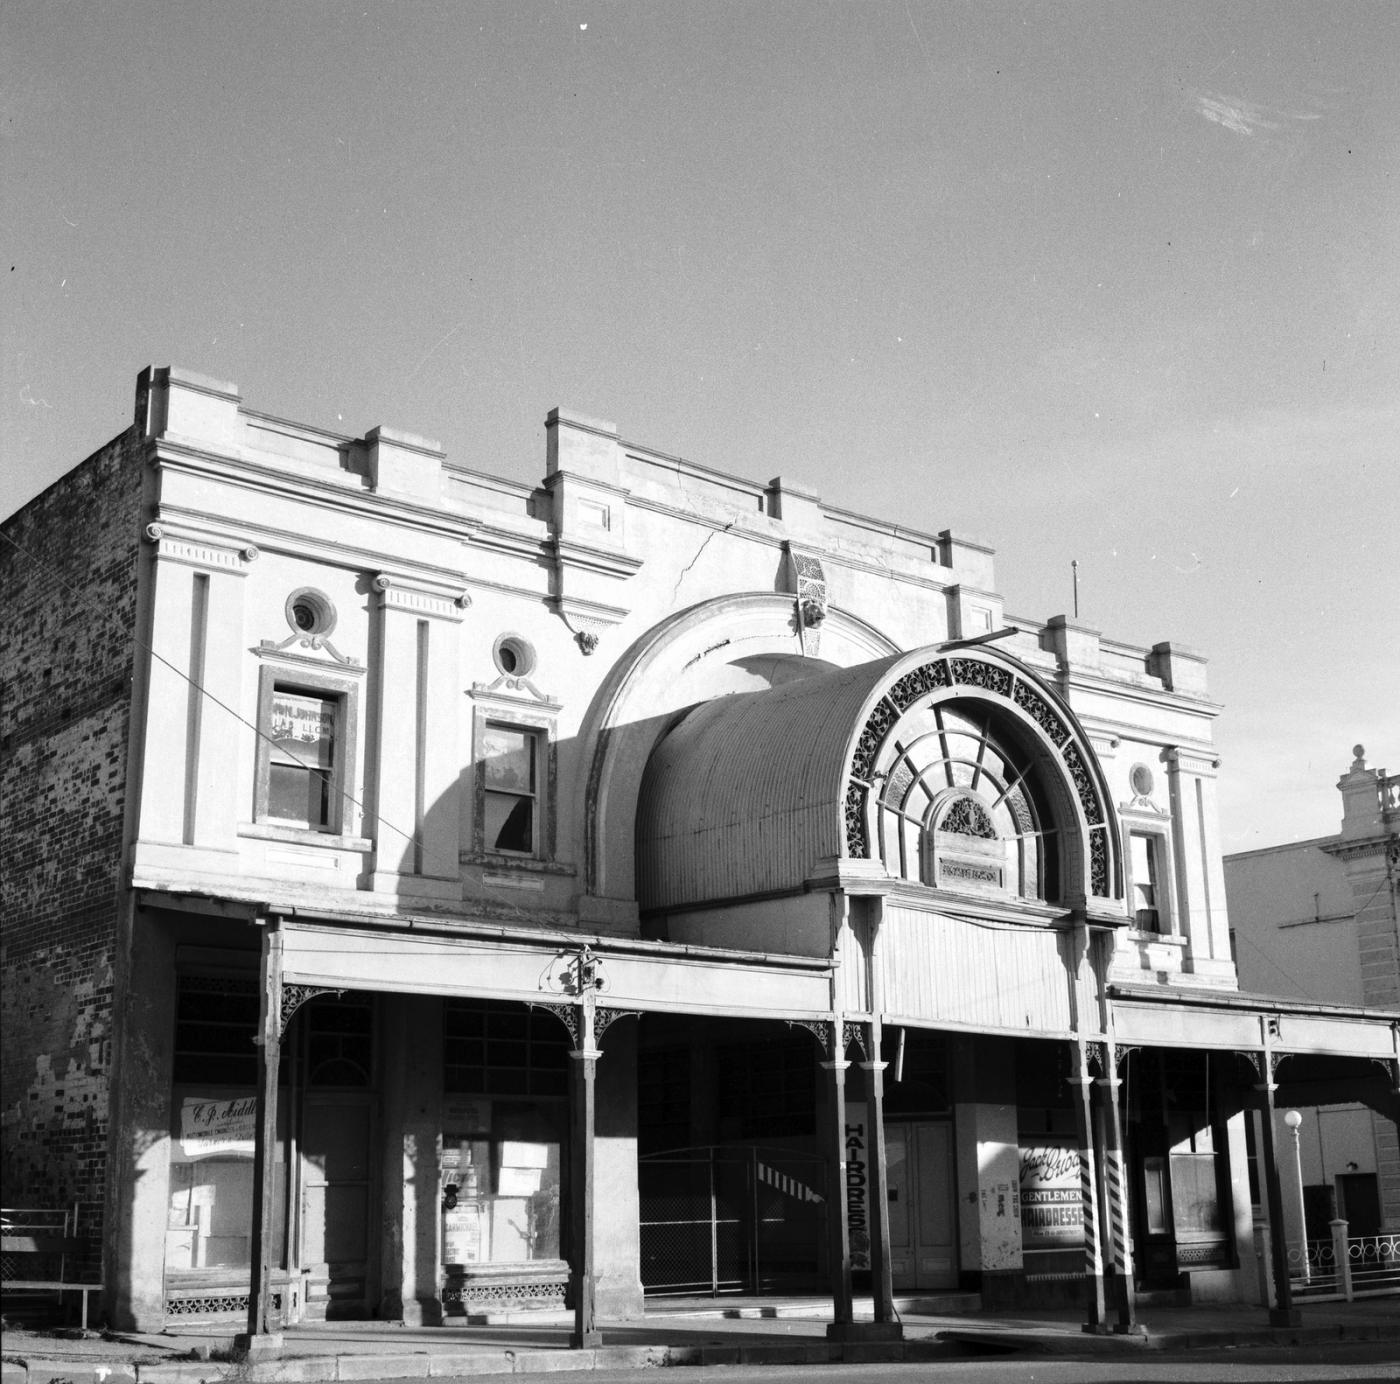 Exterior of a grand arcade in the CBD of Charters Towers